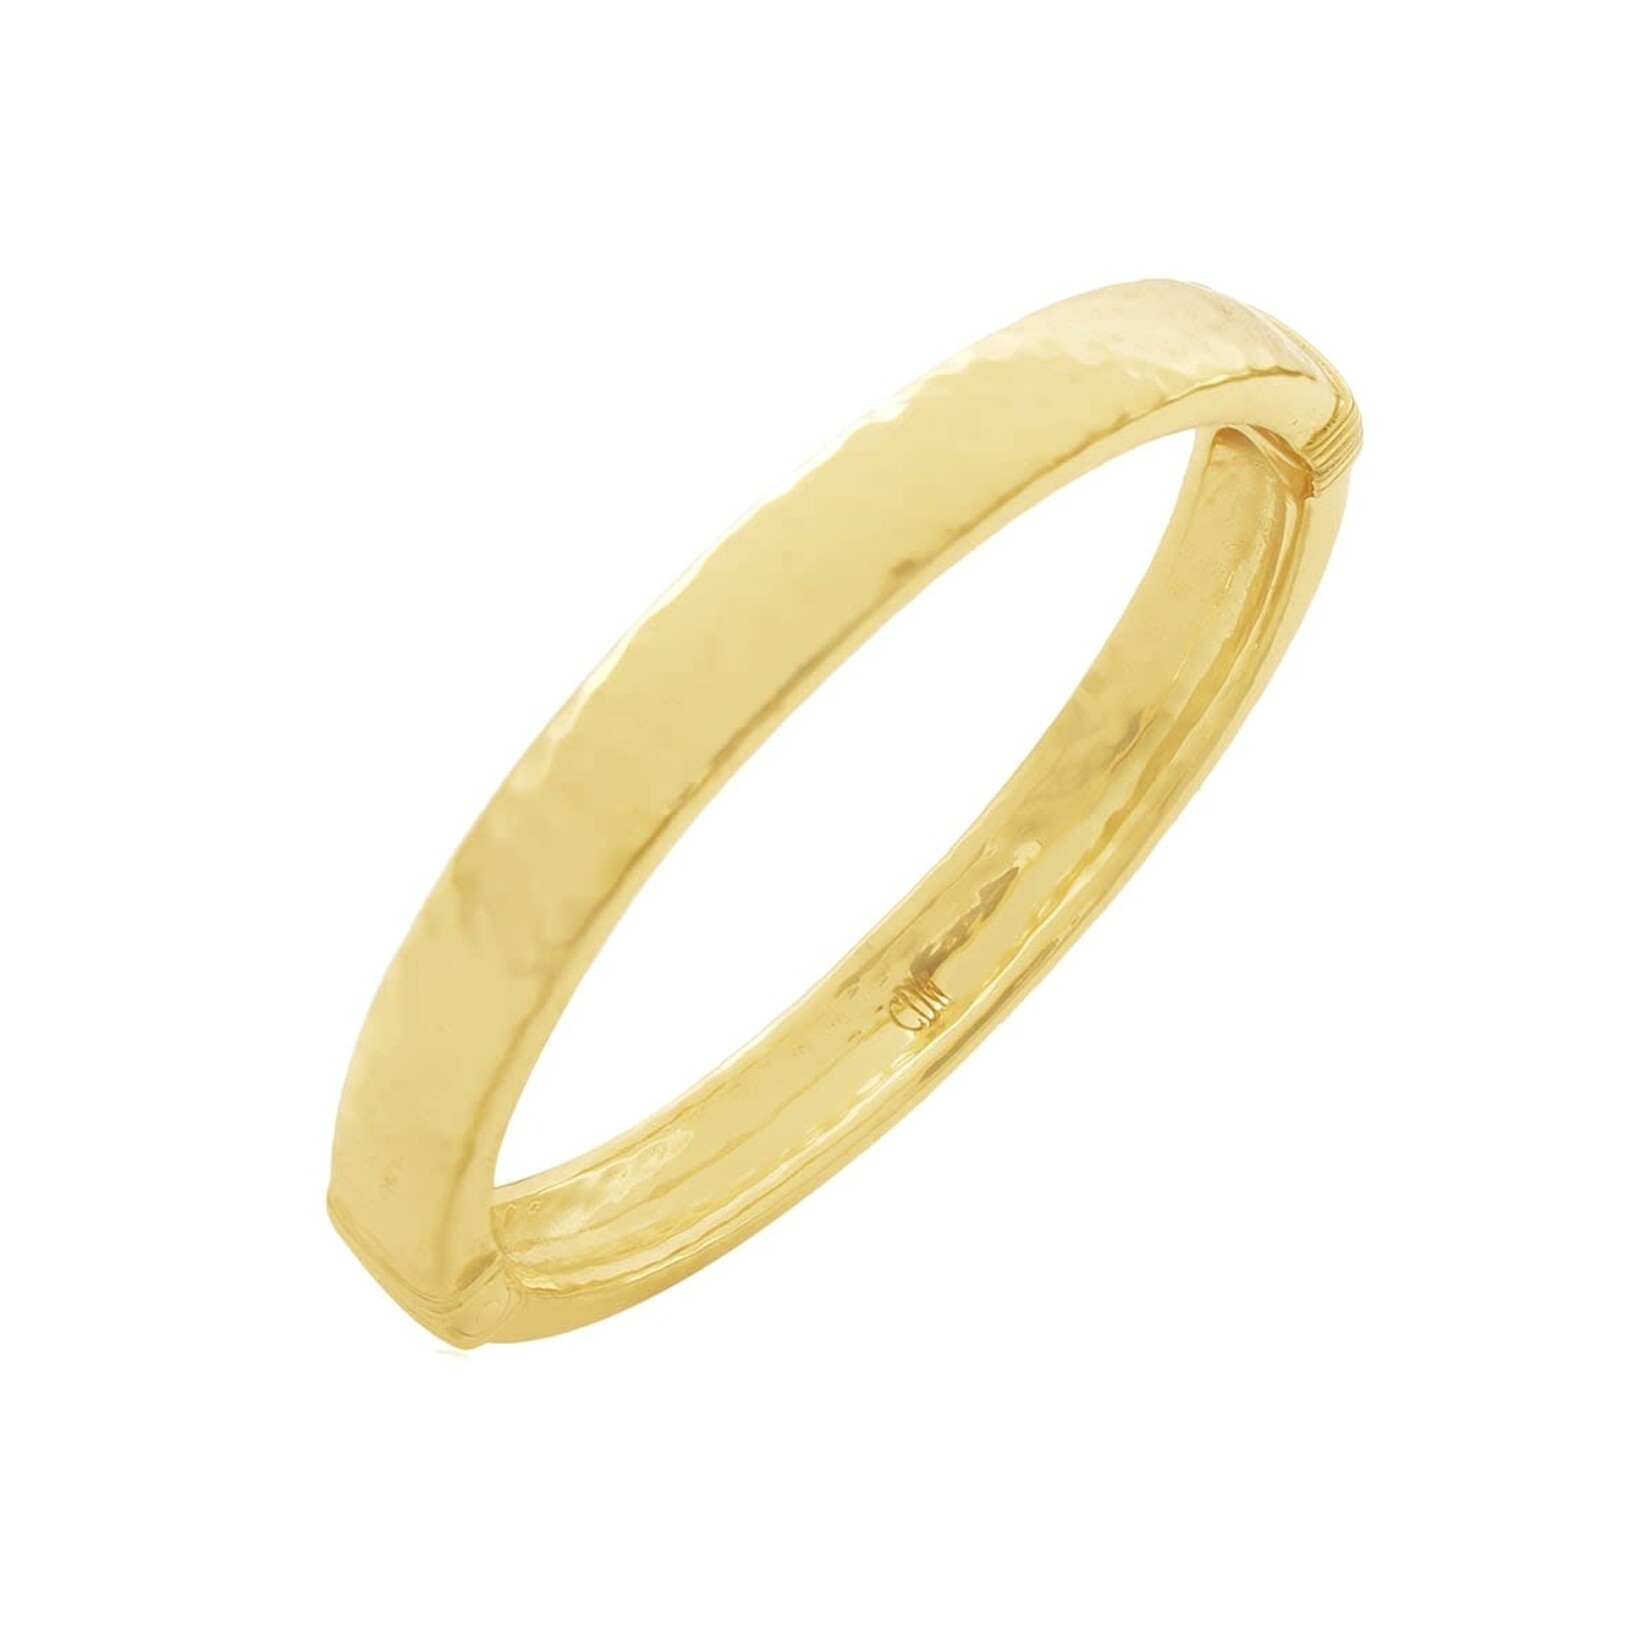 CAPUCINE DE WULF Cleopatra S/M Oval Hinged Bangle in Hammered Gold